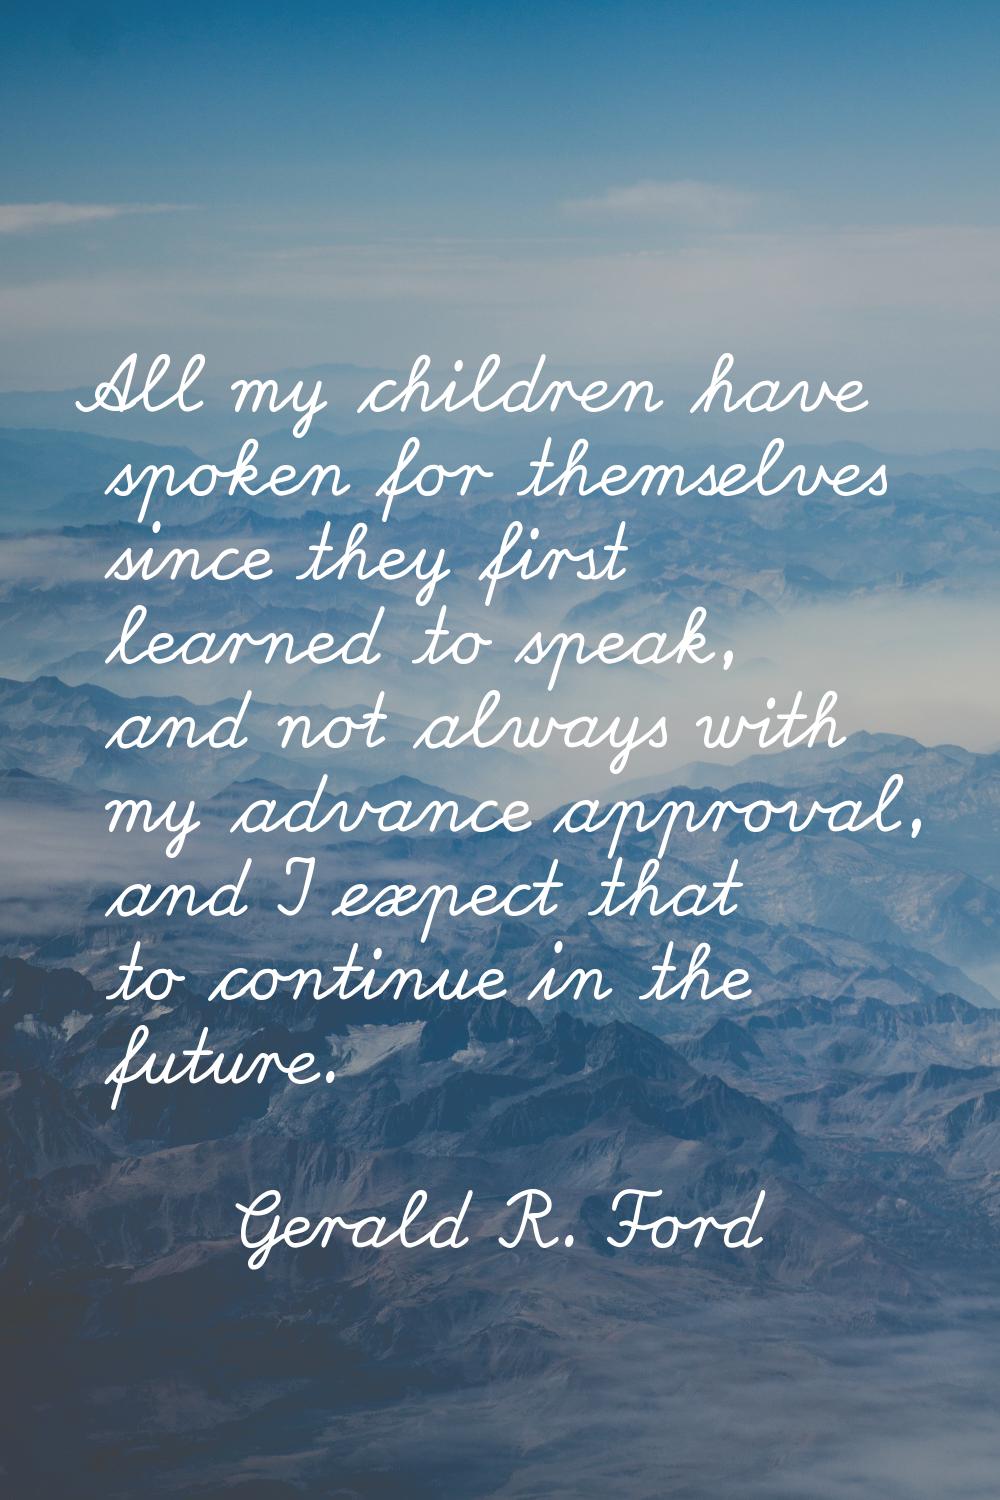 All my children have spoken for themselves since they first learned to speak, and not always with m